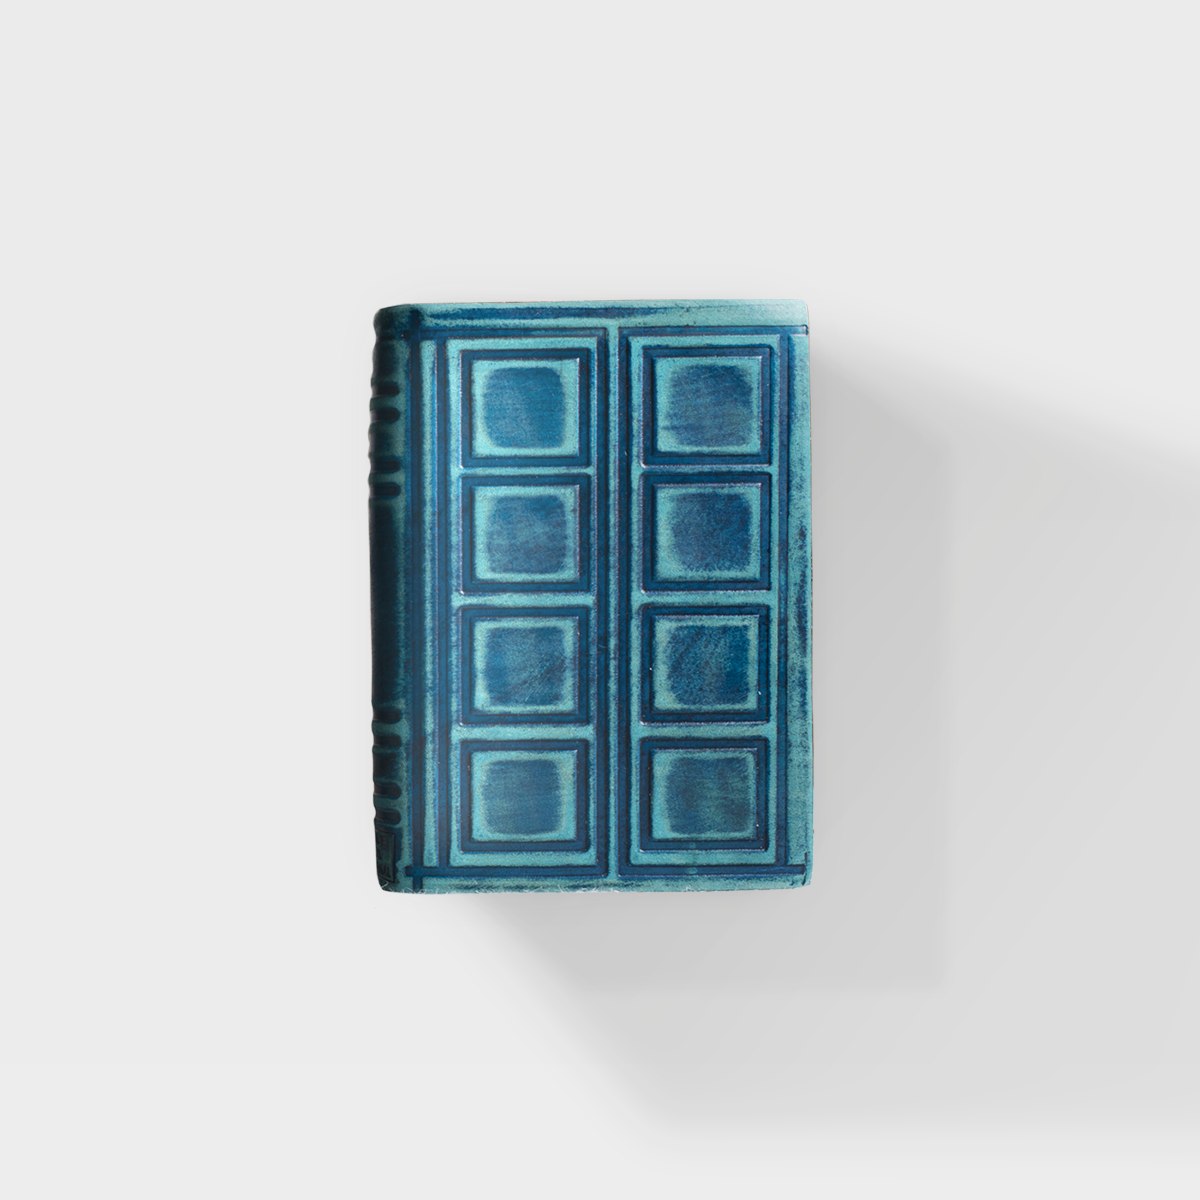 London Police Box - 5x7 - Leather Journal